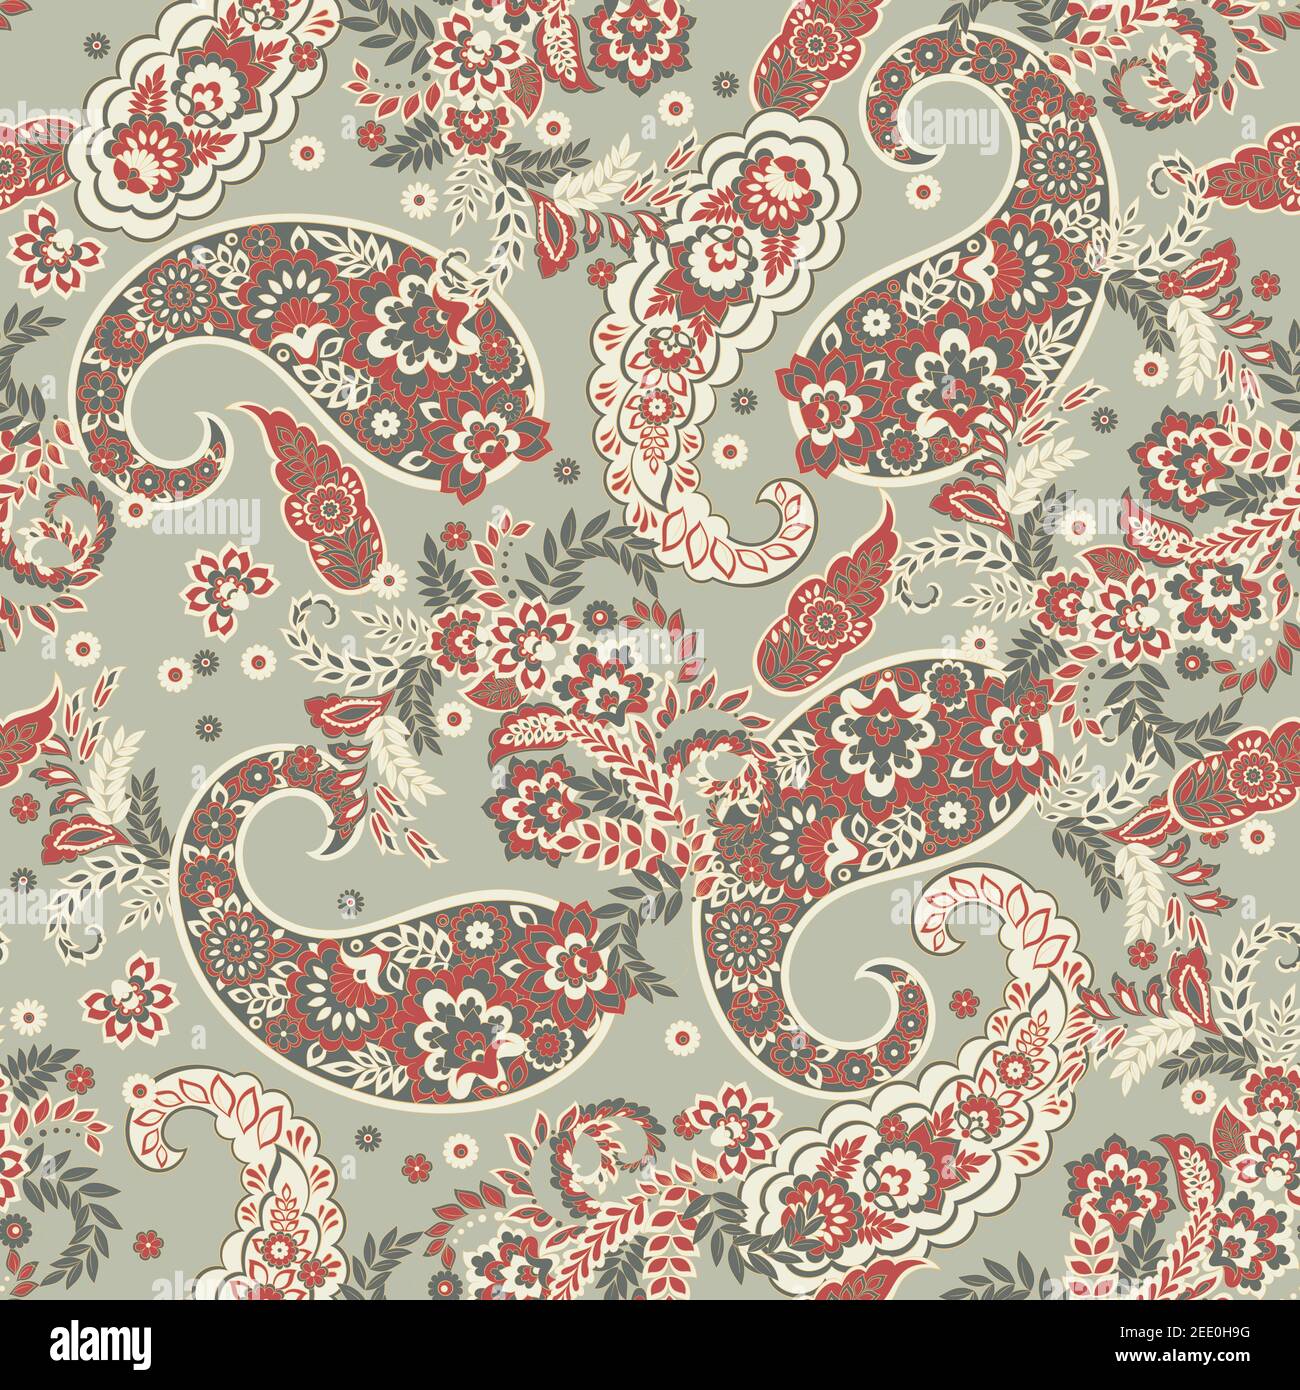 Paisley Damask ornament. Seamless Vector pattern Stock Vector